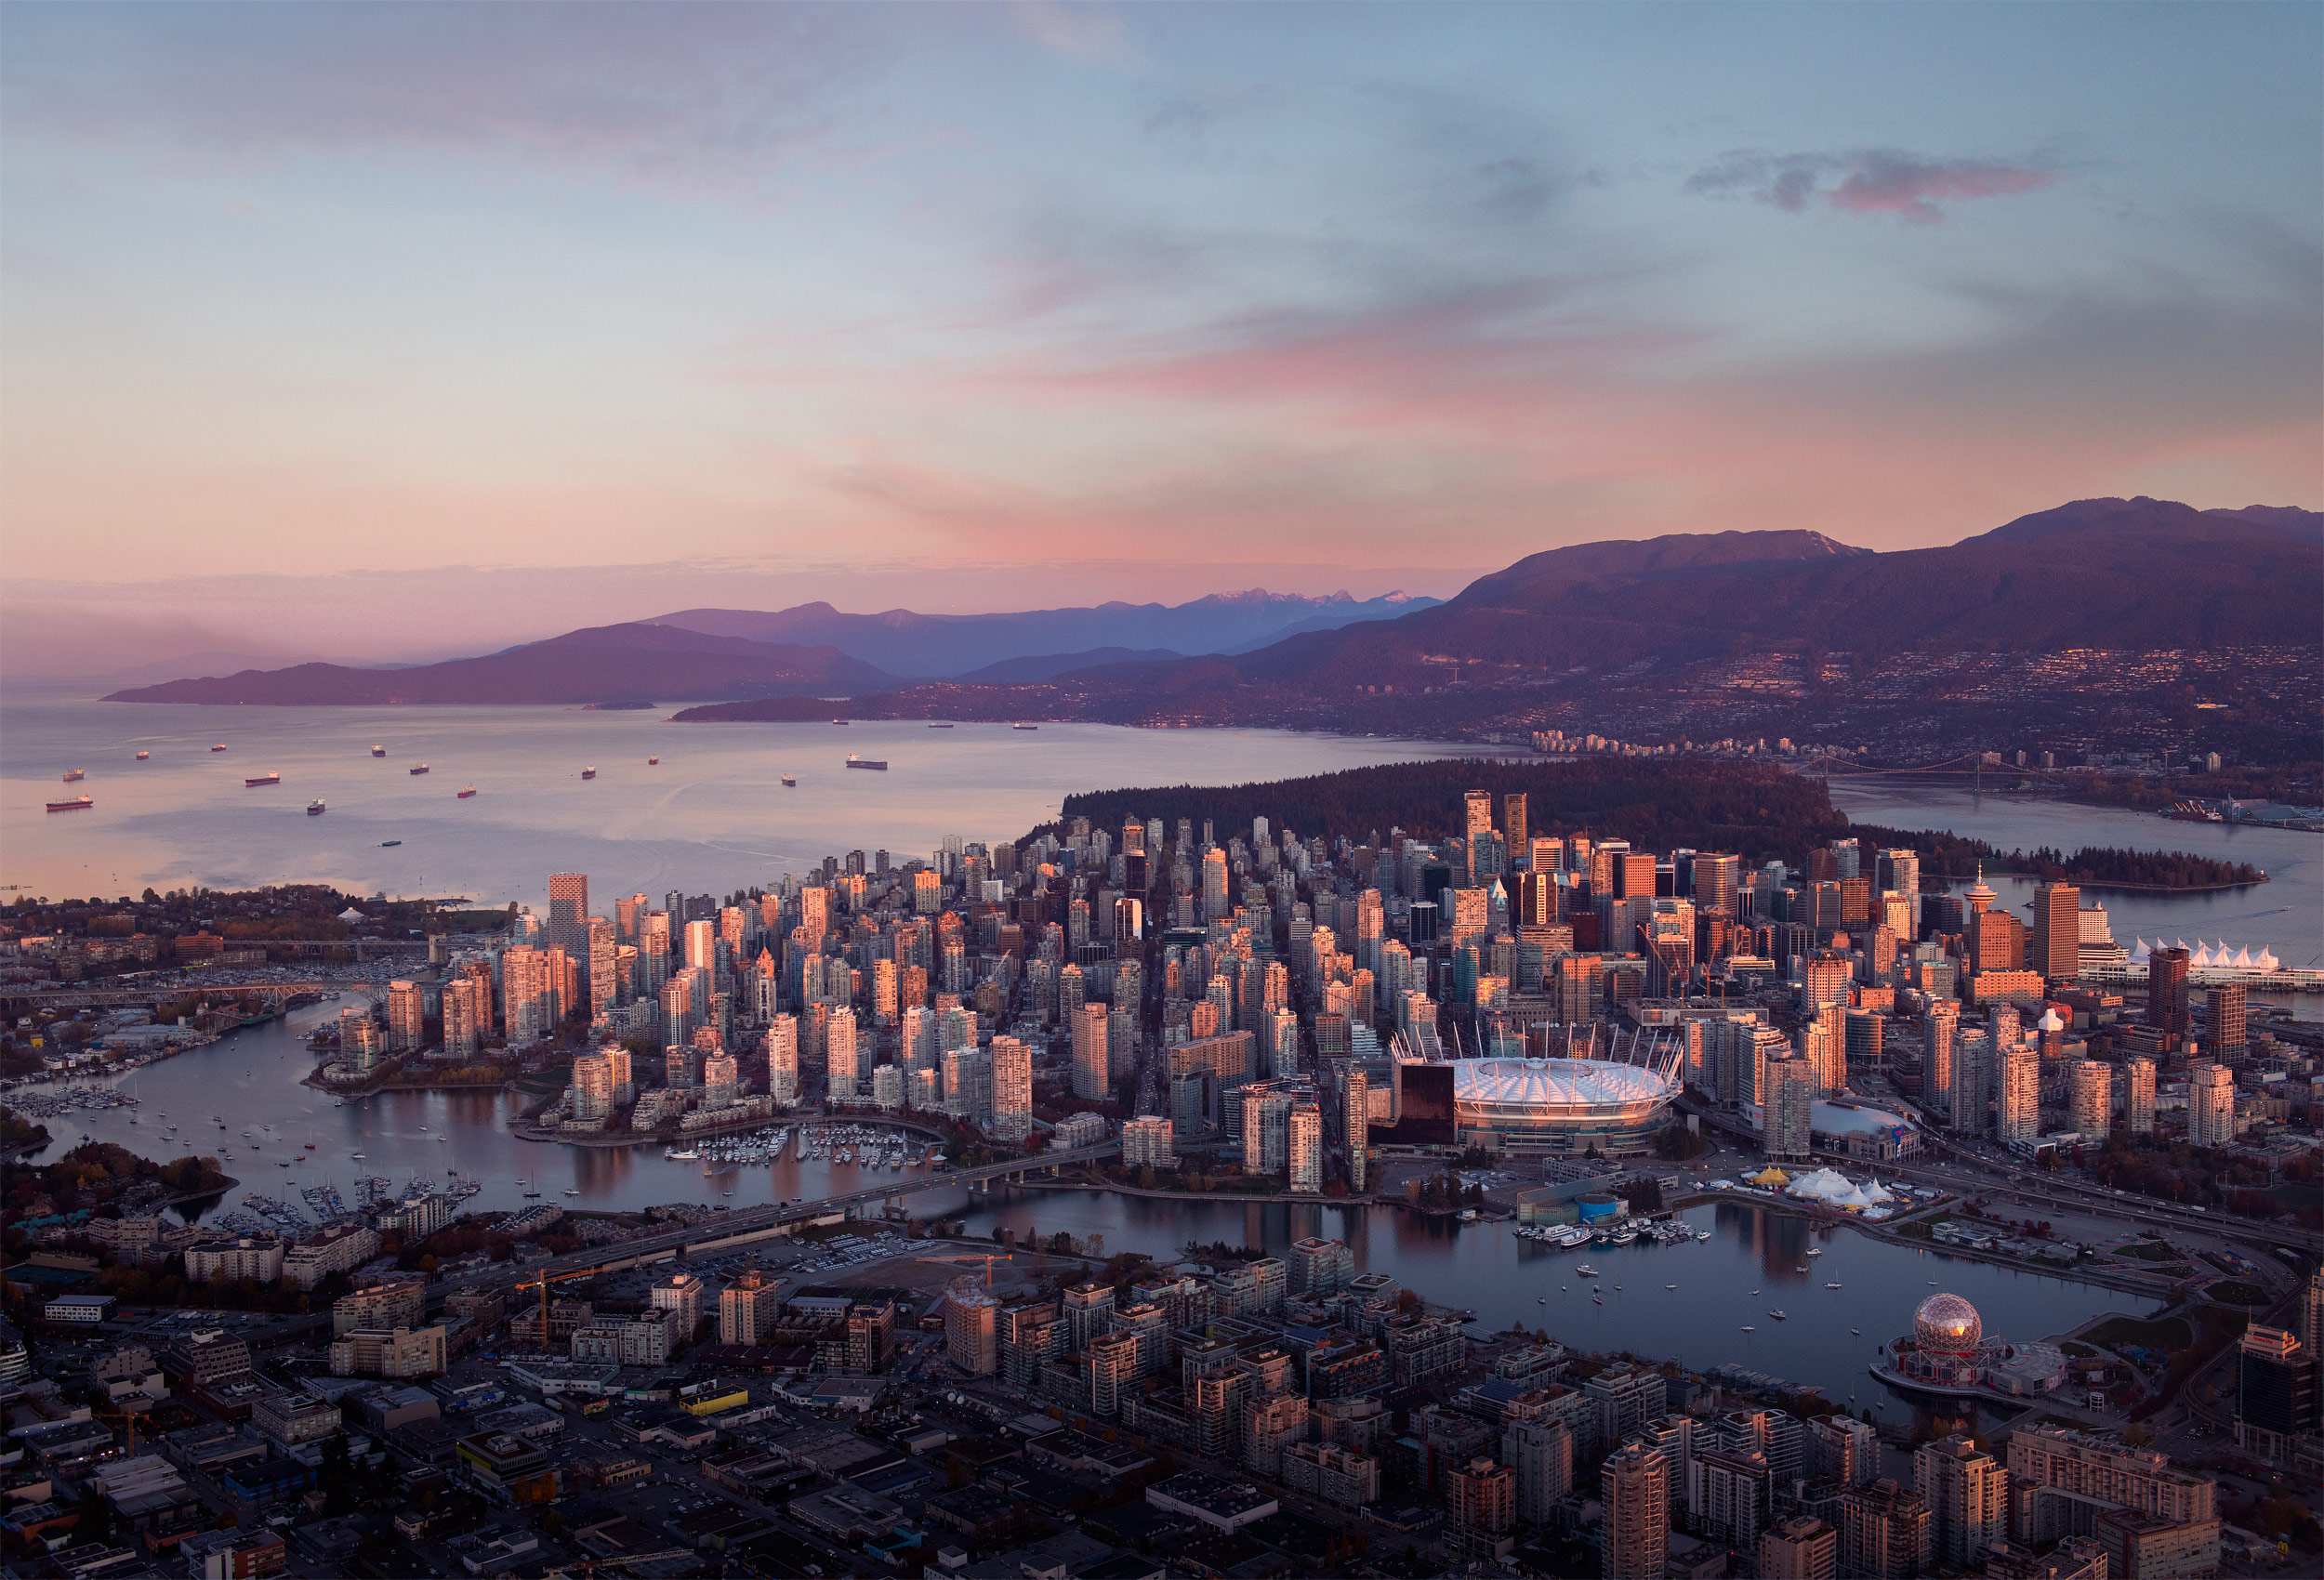 aerial photograph of downtown Vancouver taken at sunrise by aerial photographer Kristopher Grunert